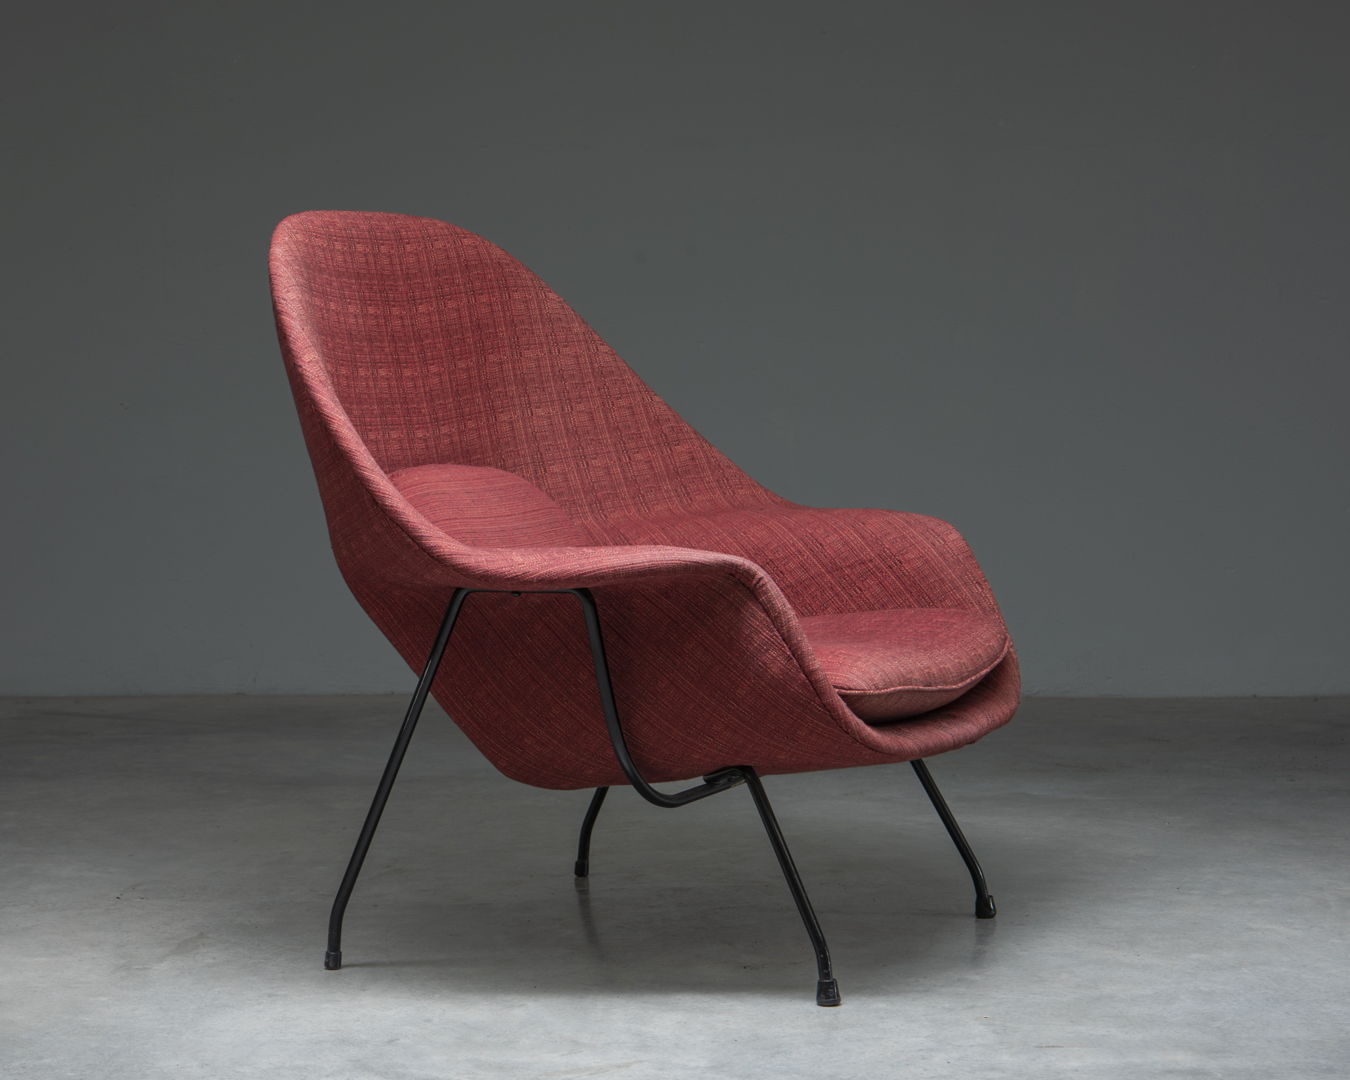 'Womb Chair' with ottoman, designed in 1946 by Eero Saarinen for Knoll Int